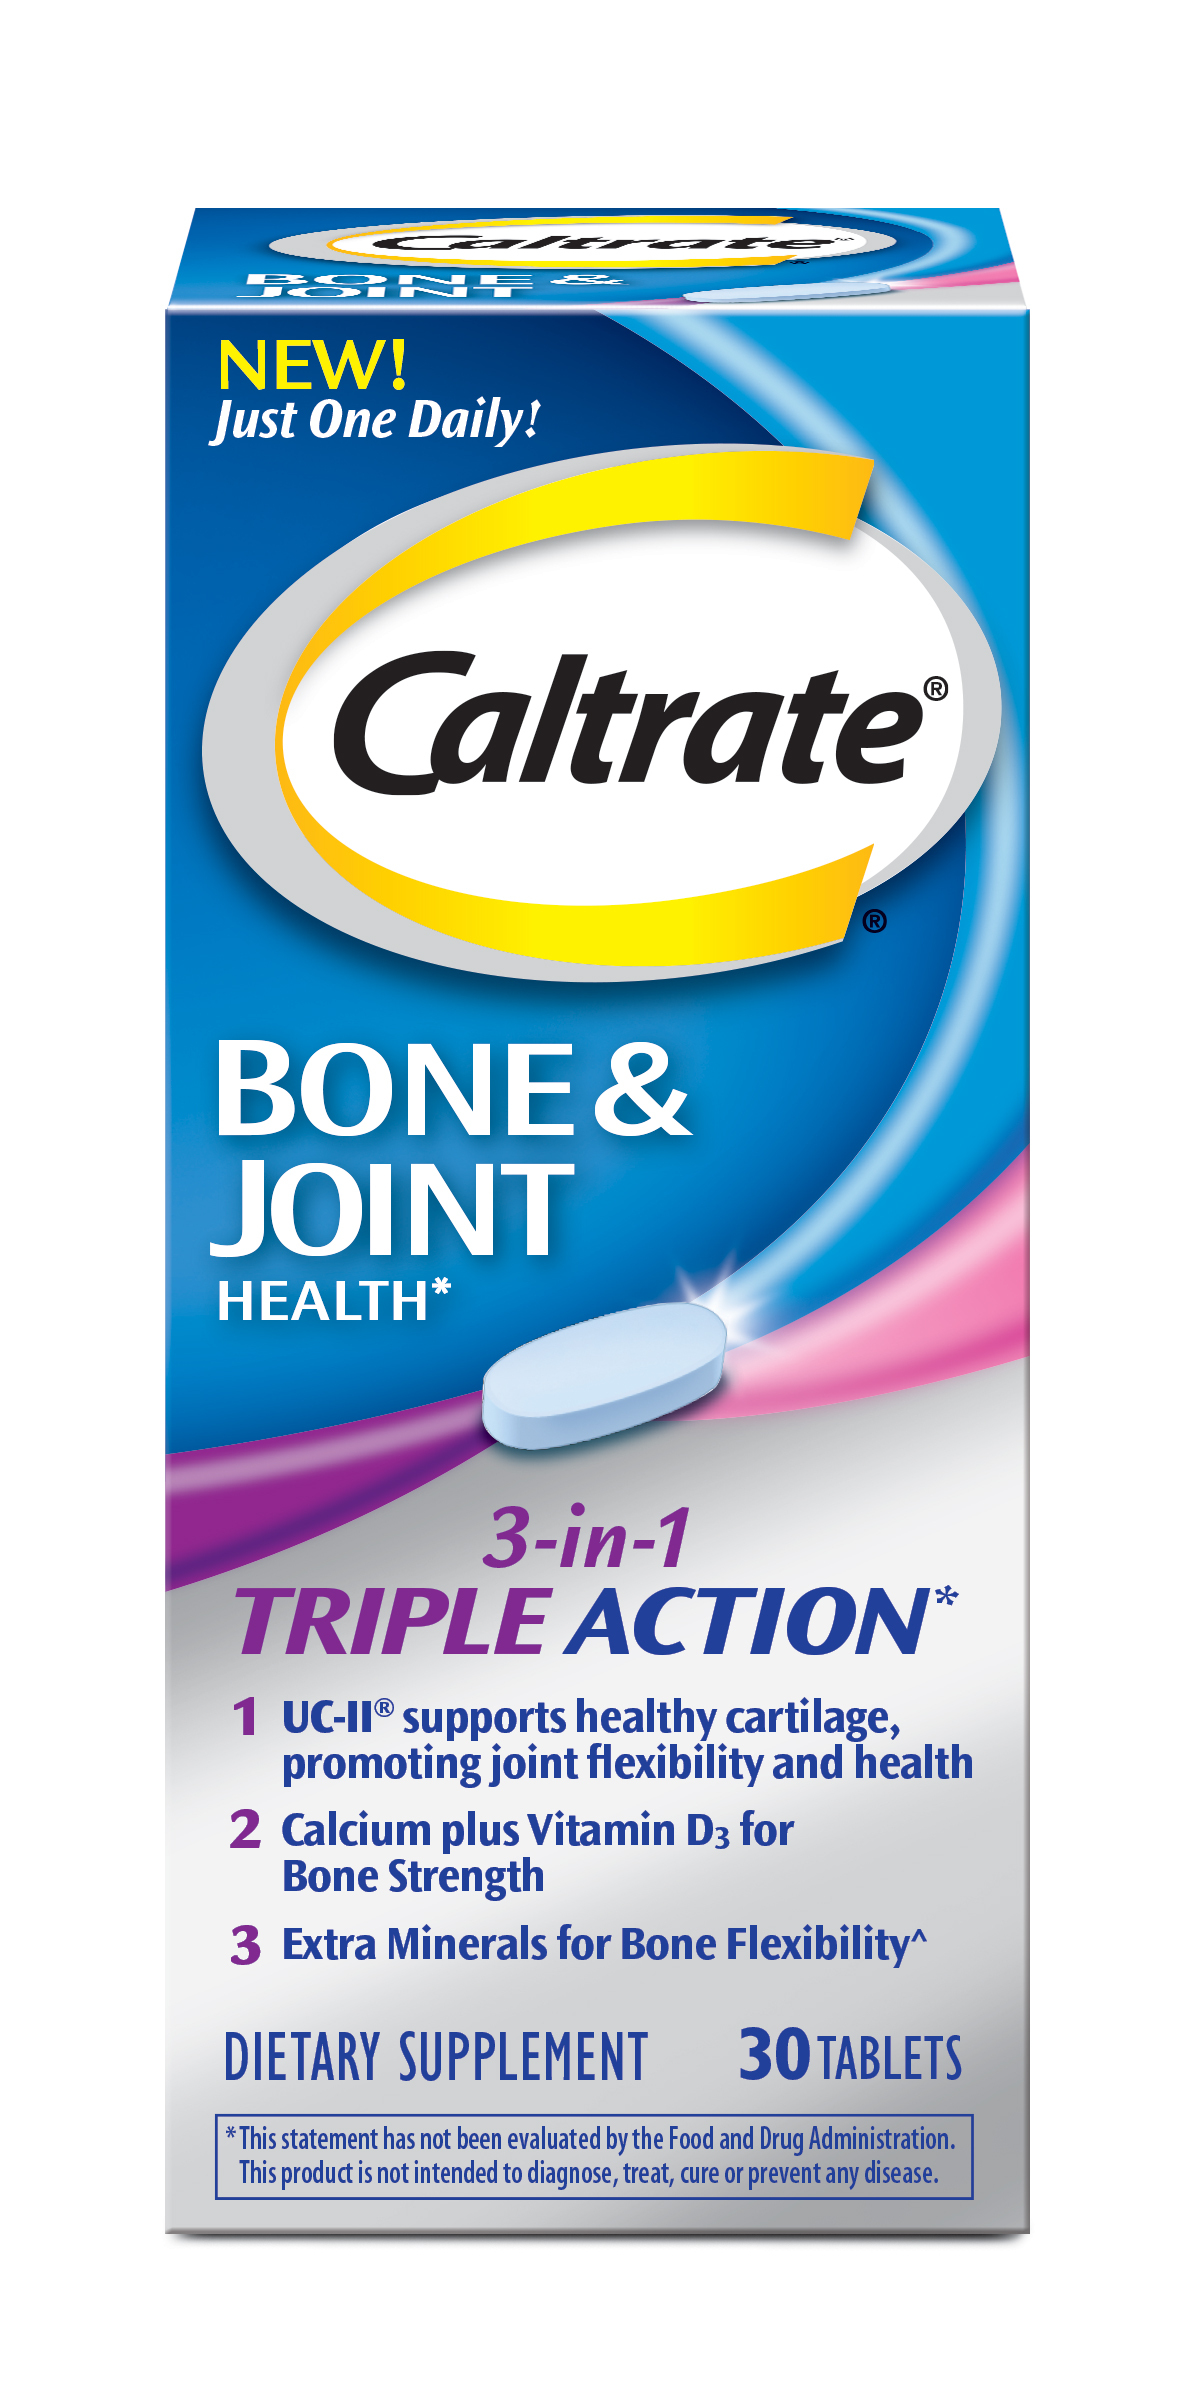 Joint and bone health supplements